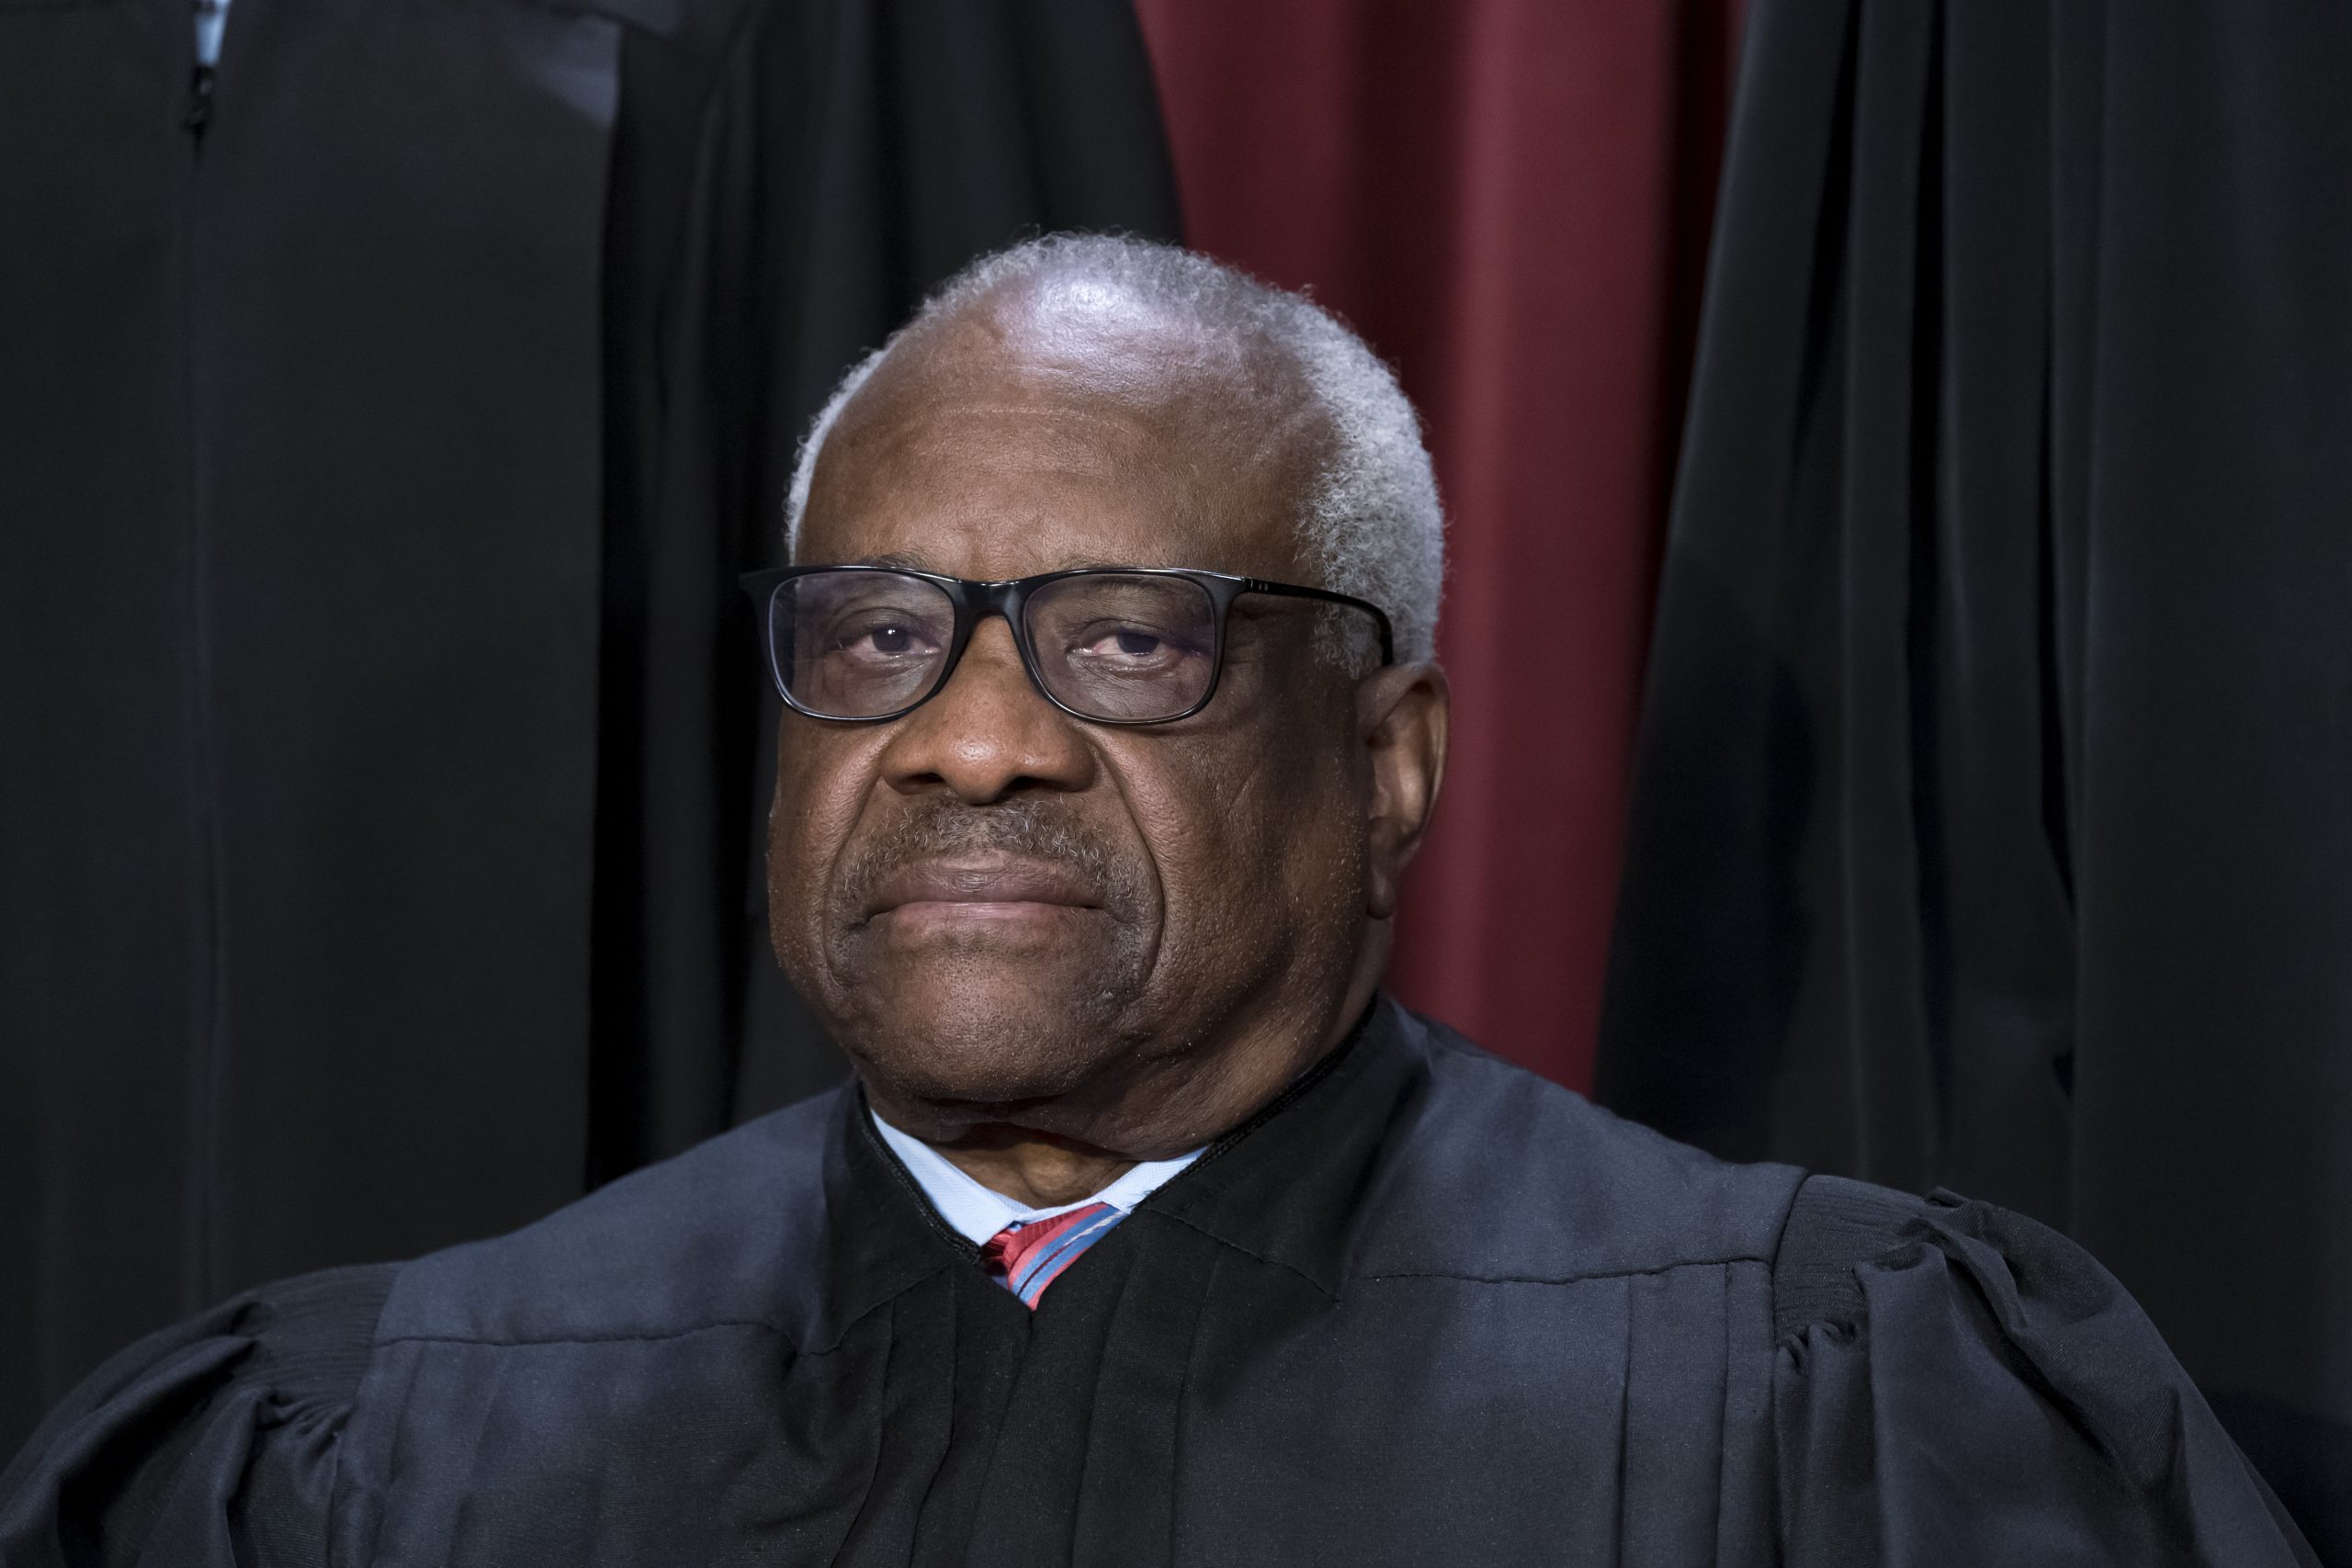 Trump lawyers saw Justice Thomas as ‘only chance’ to stop 2020 election certification